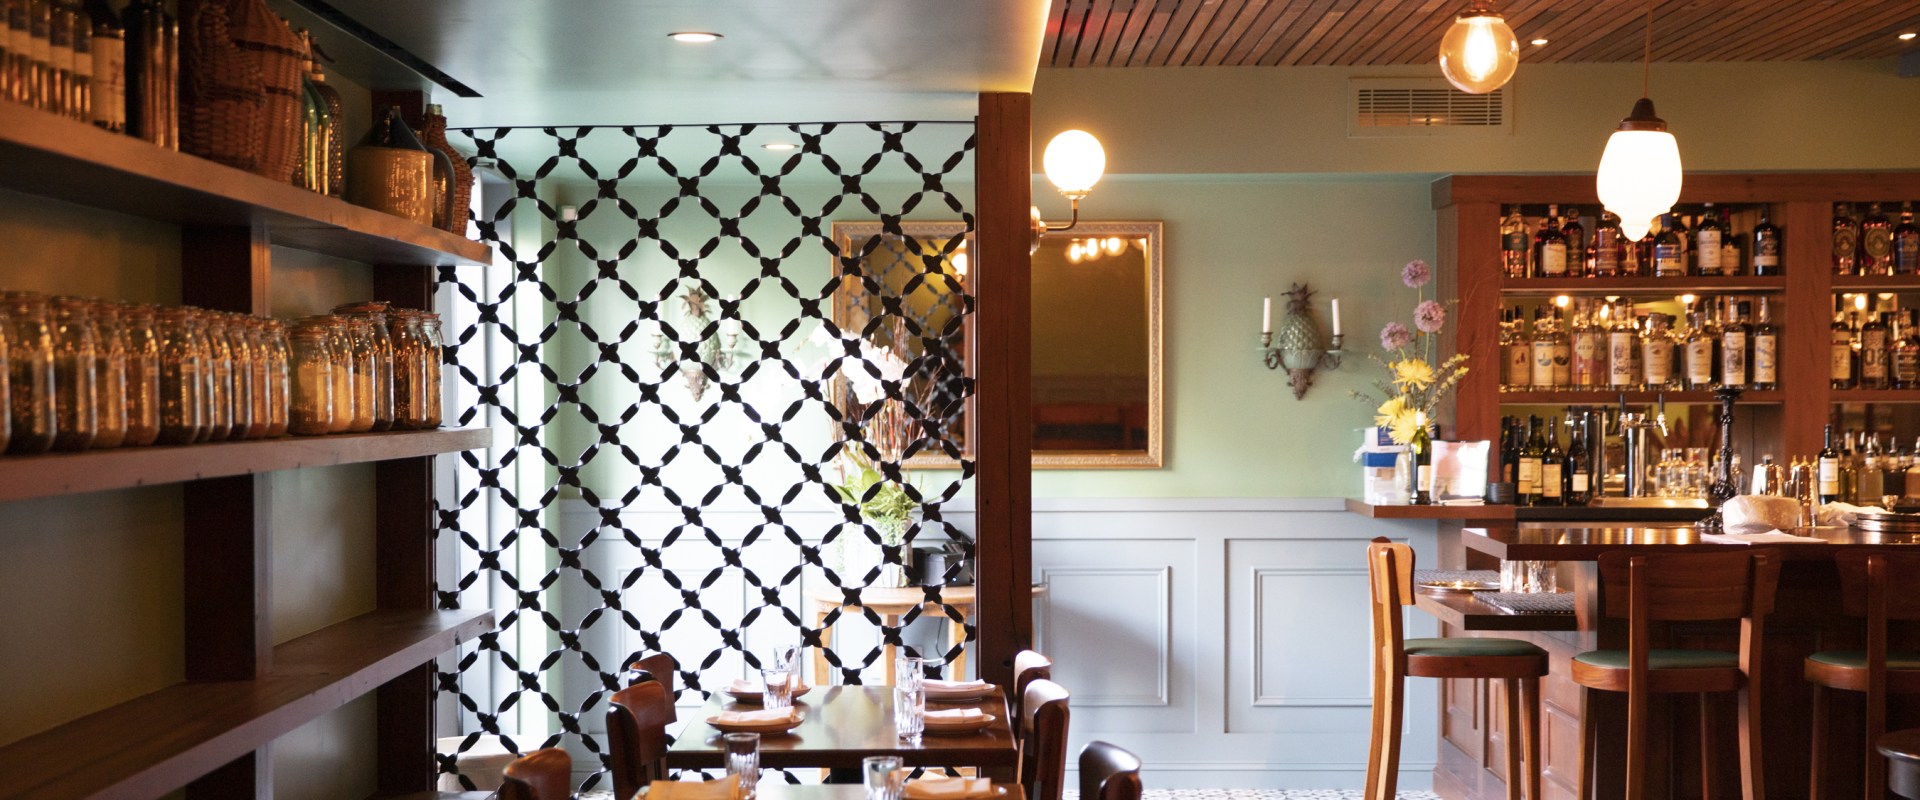 15 of the Most Fabulous French Restaurants in Los Angeles